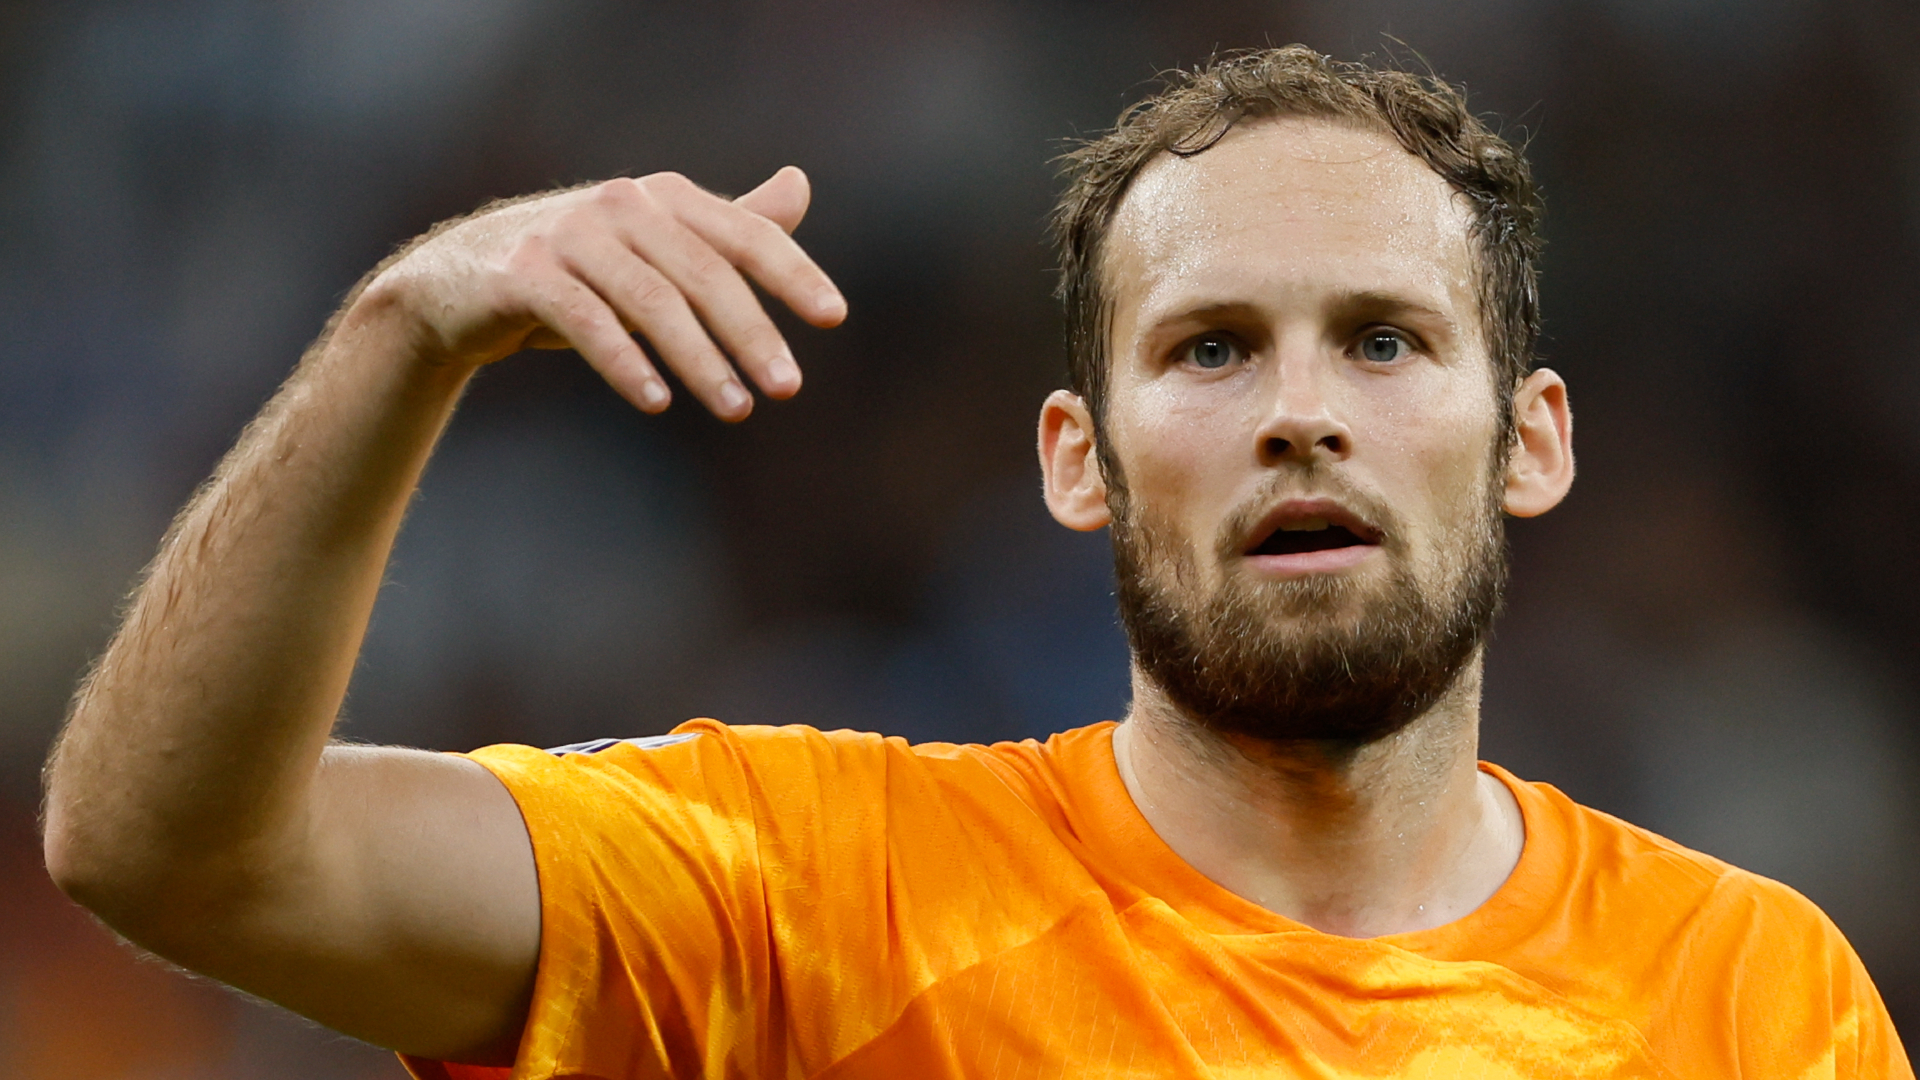 Blind a free agent after Ajax terminates his contract